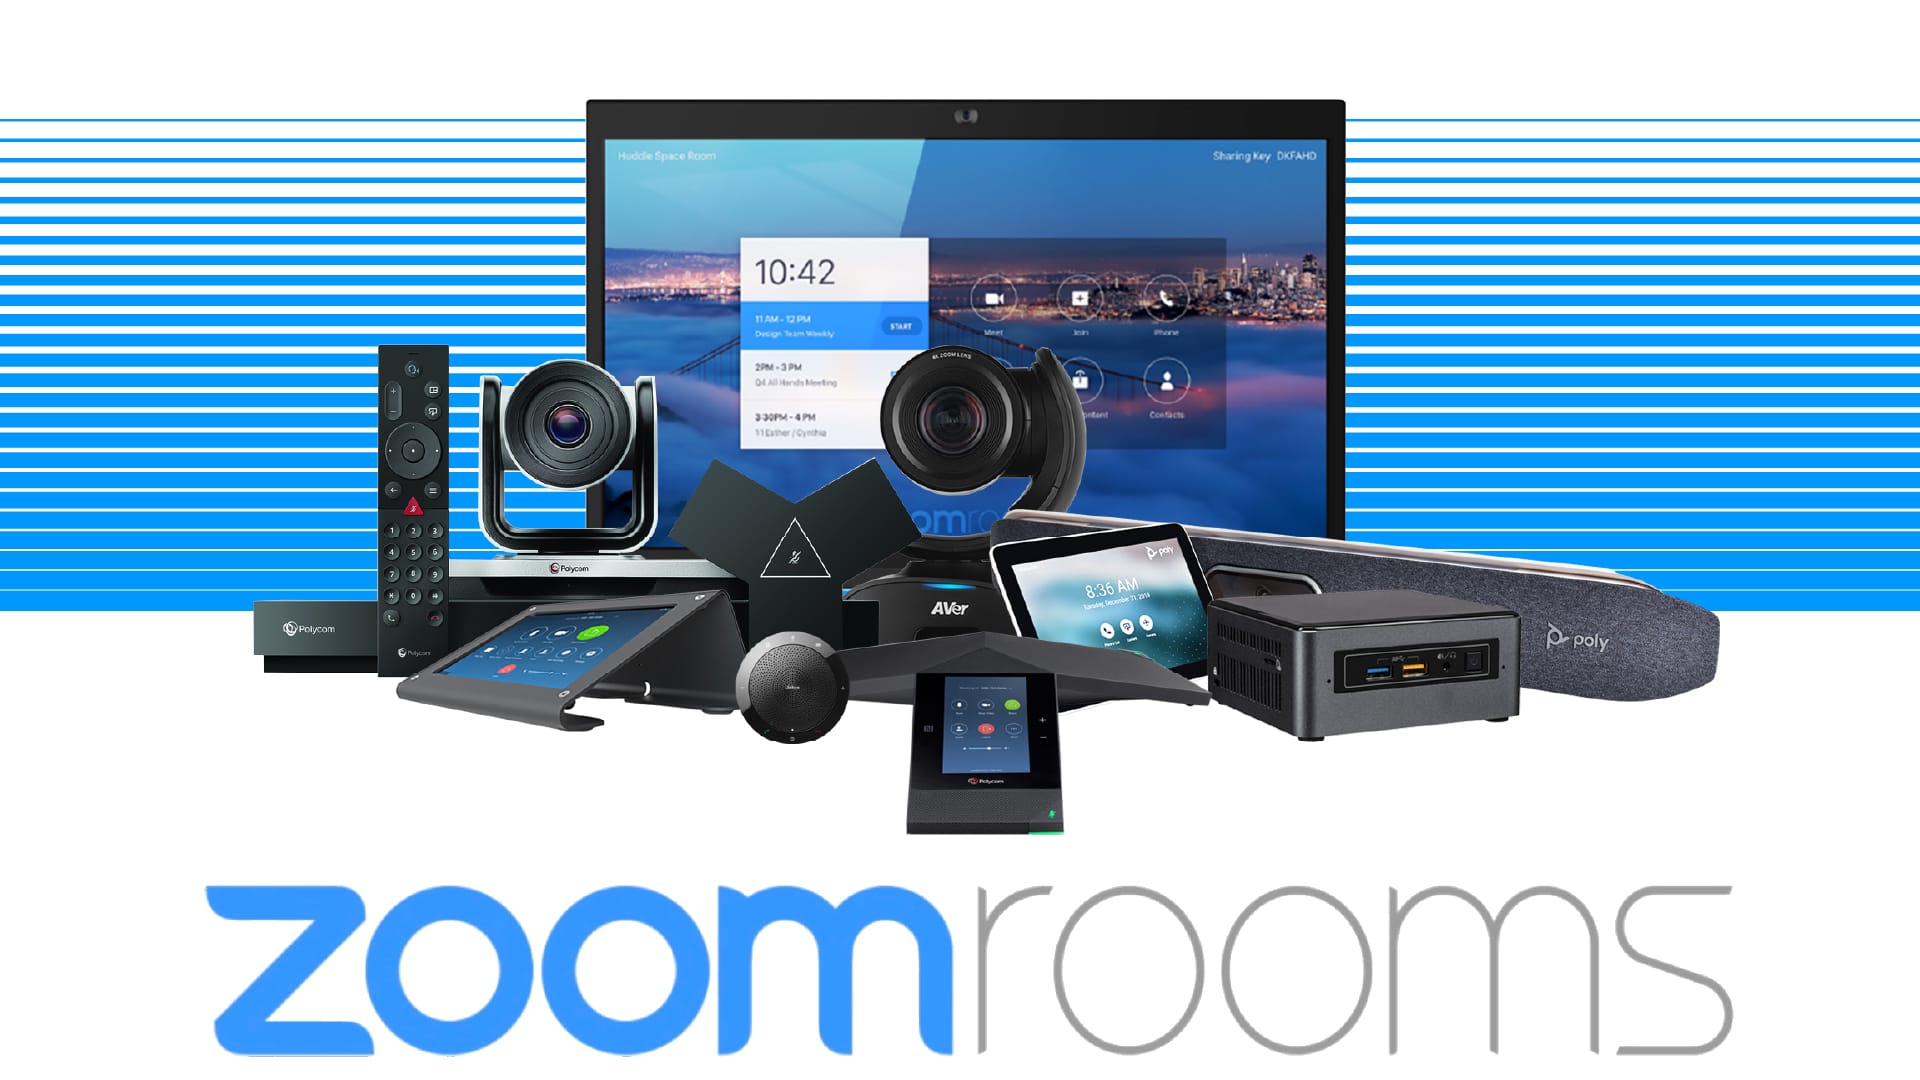 What is a zoom room?